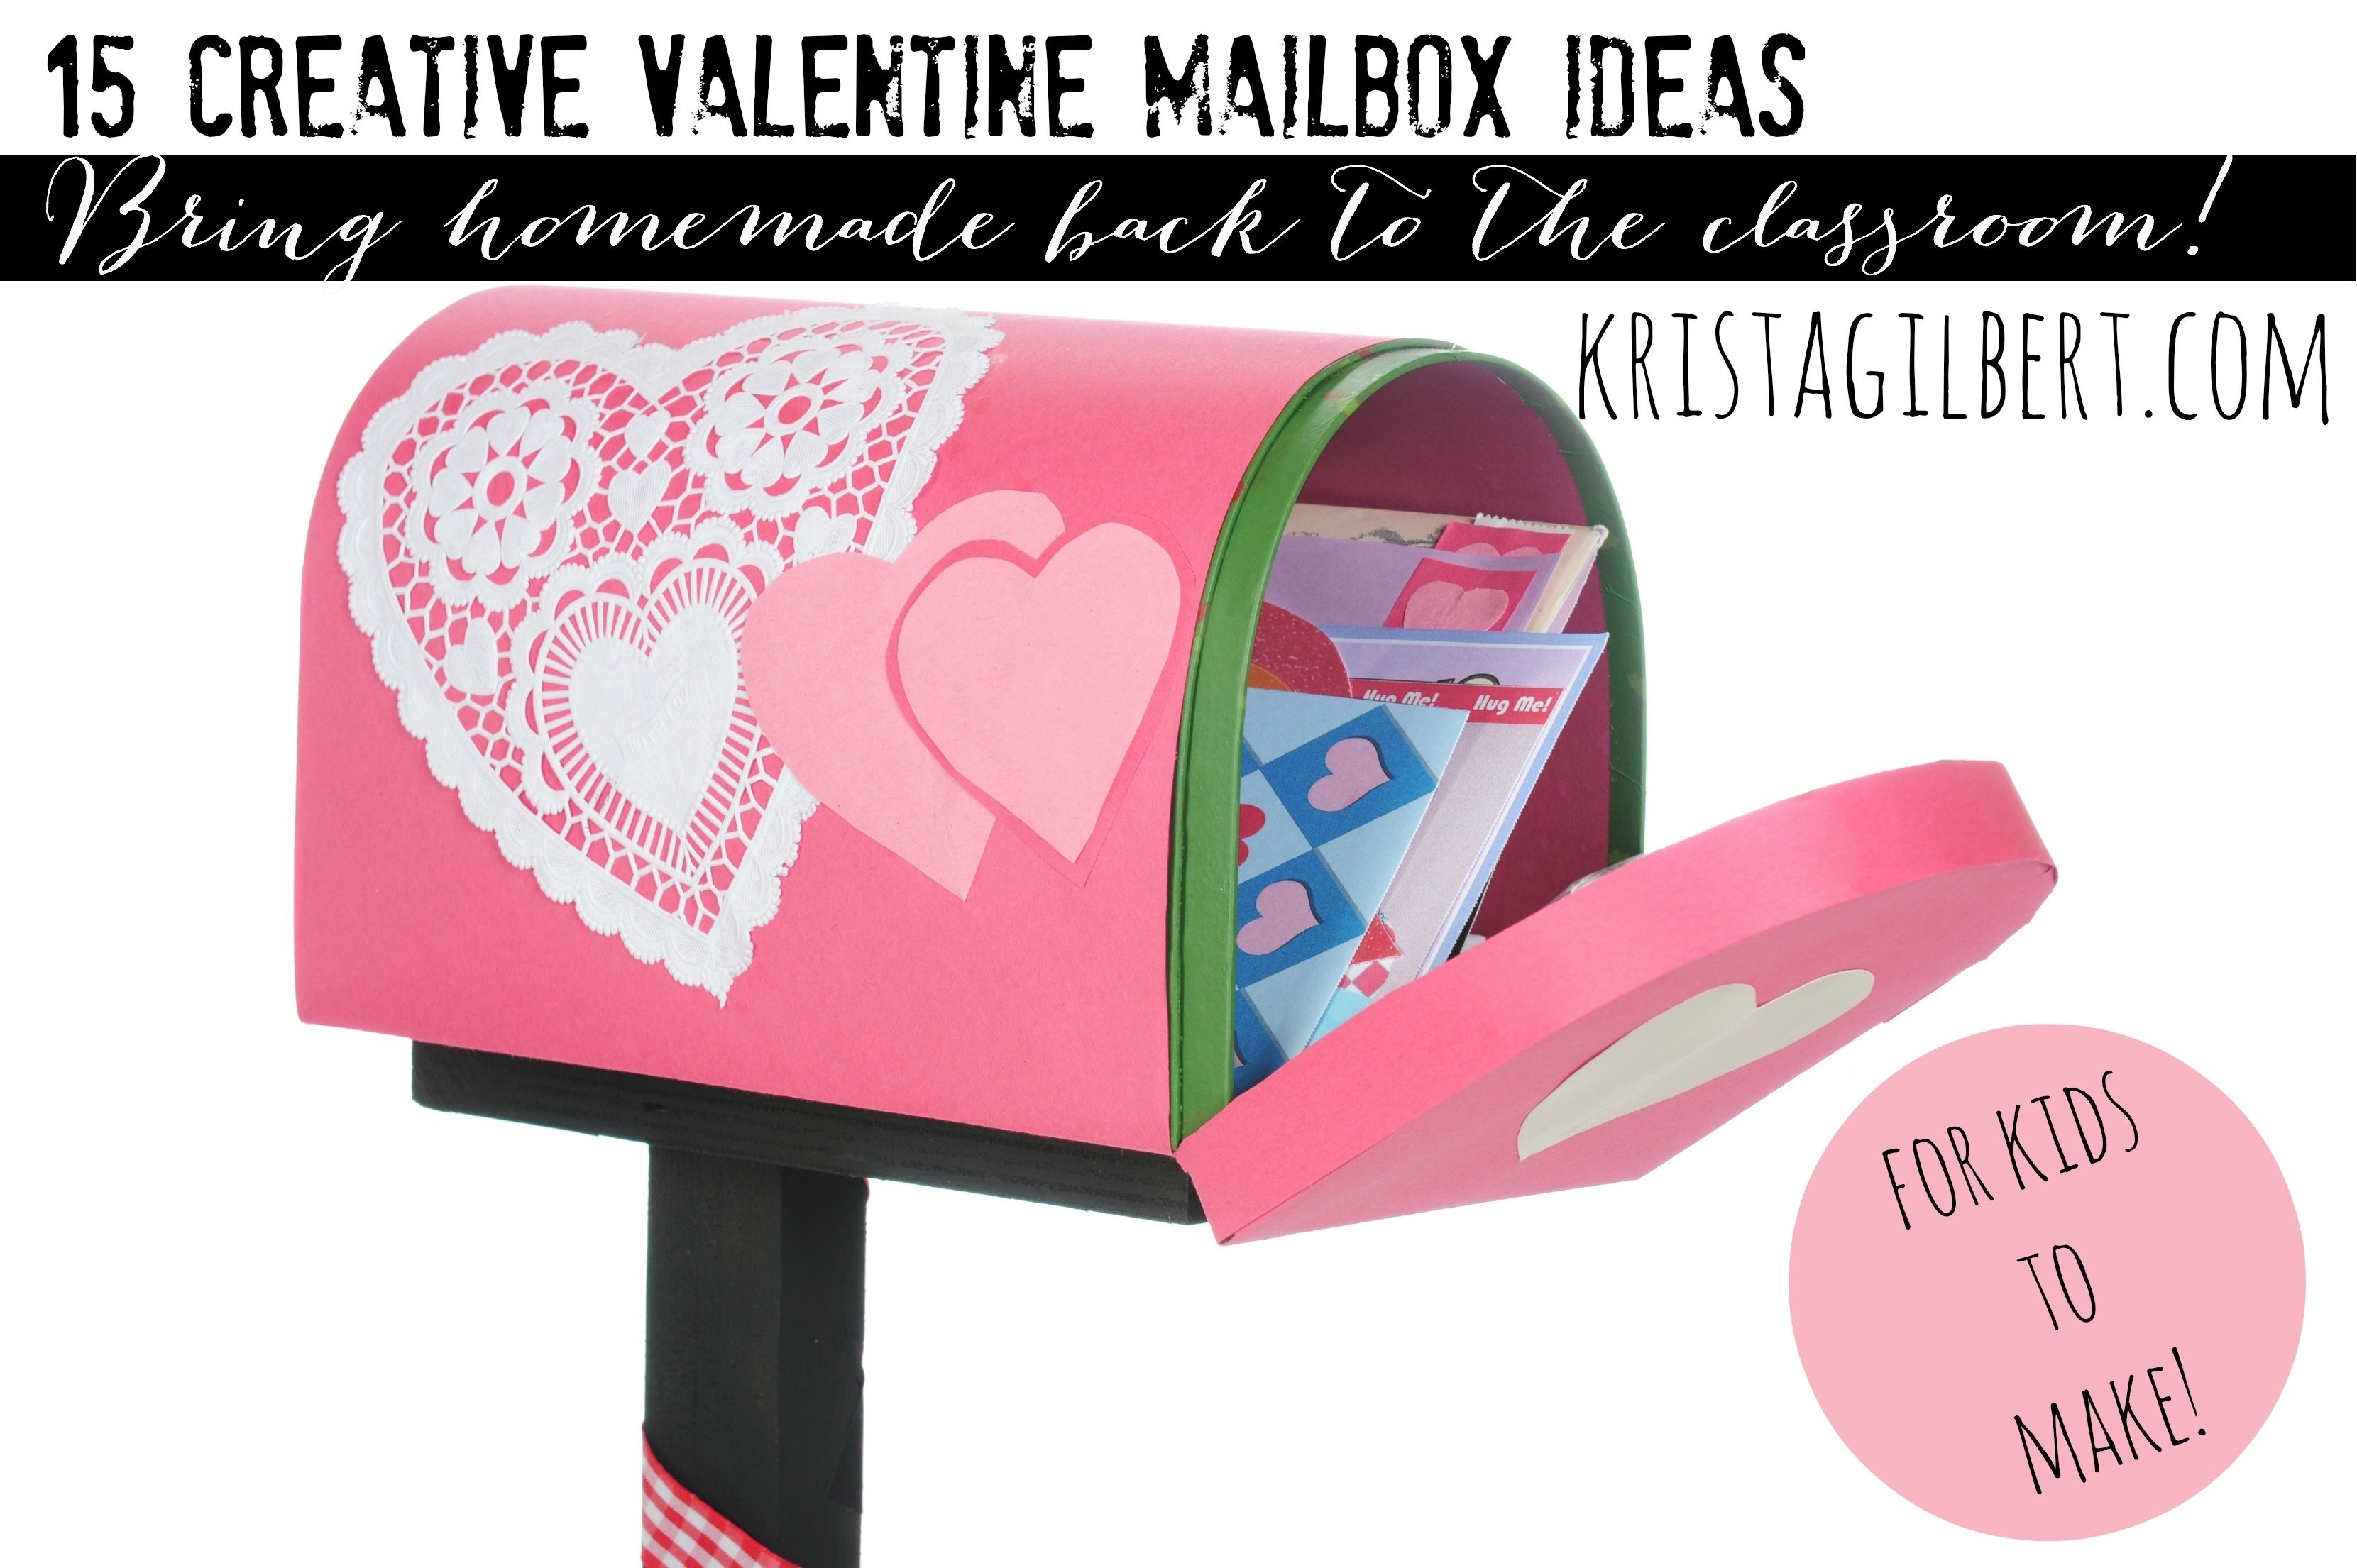 10 Fashionable Ideas For Valentines Day Boxes For Kids fab valentines day box ideas for kids krista gilbert 2 2022